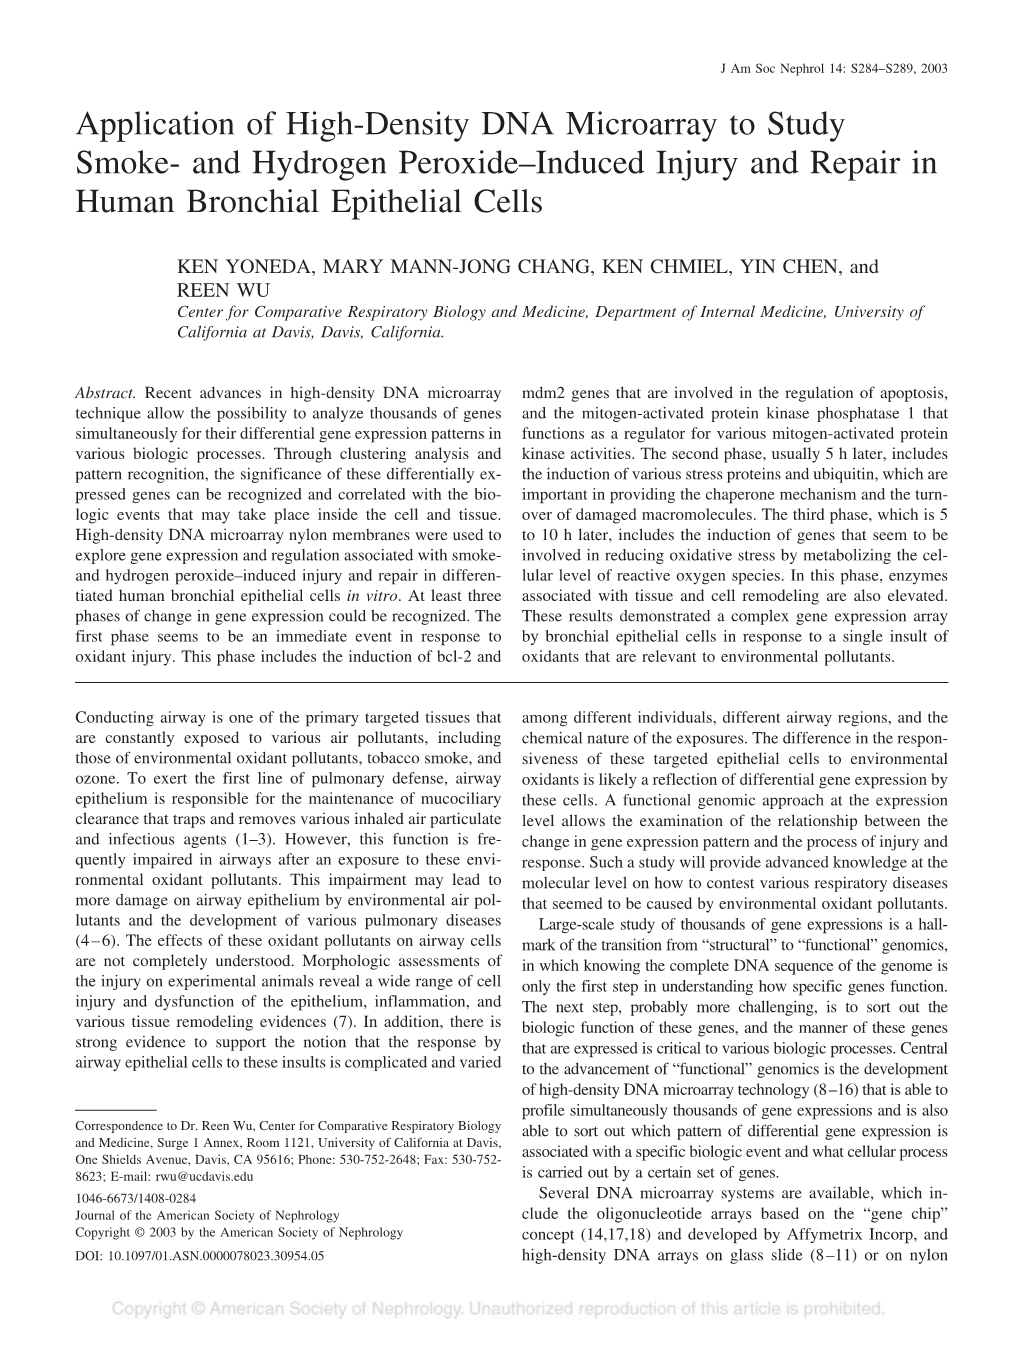 Application of High-Density DNA Microarray to Study Smoke- and Hydrogen Peroxide–Induced Injury and Repair in Human Bronchial Epithelial Cells